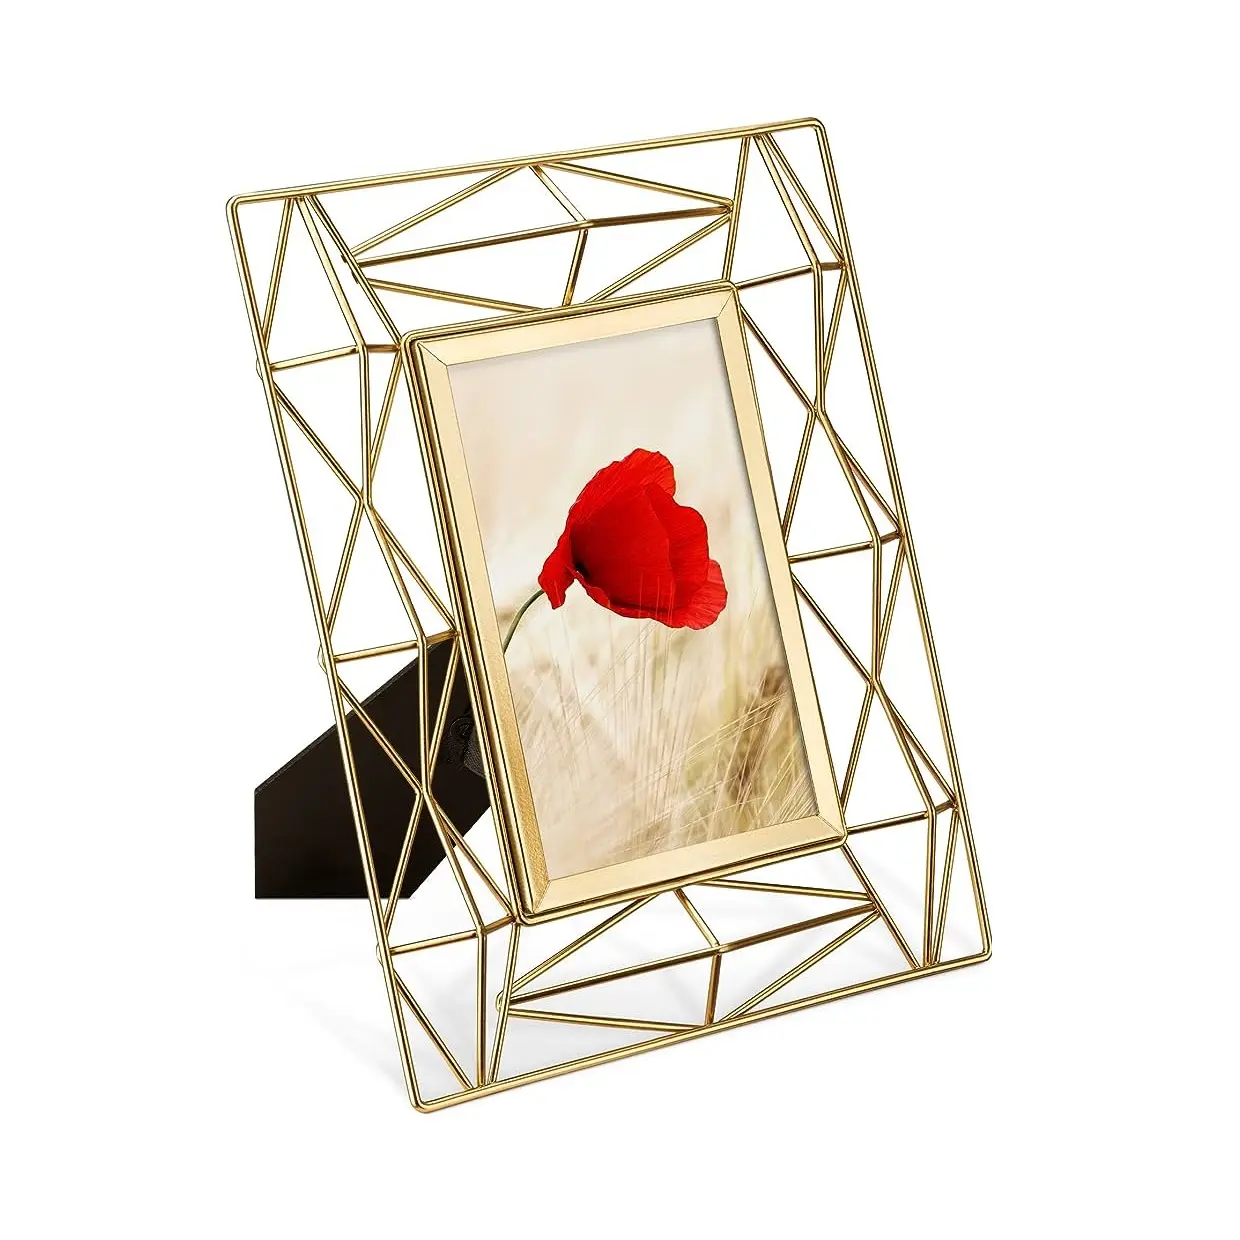 Latest arrival luxury picture frames hot selling photo frame metal in brass aluminium iron new tendy finished frame